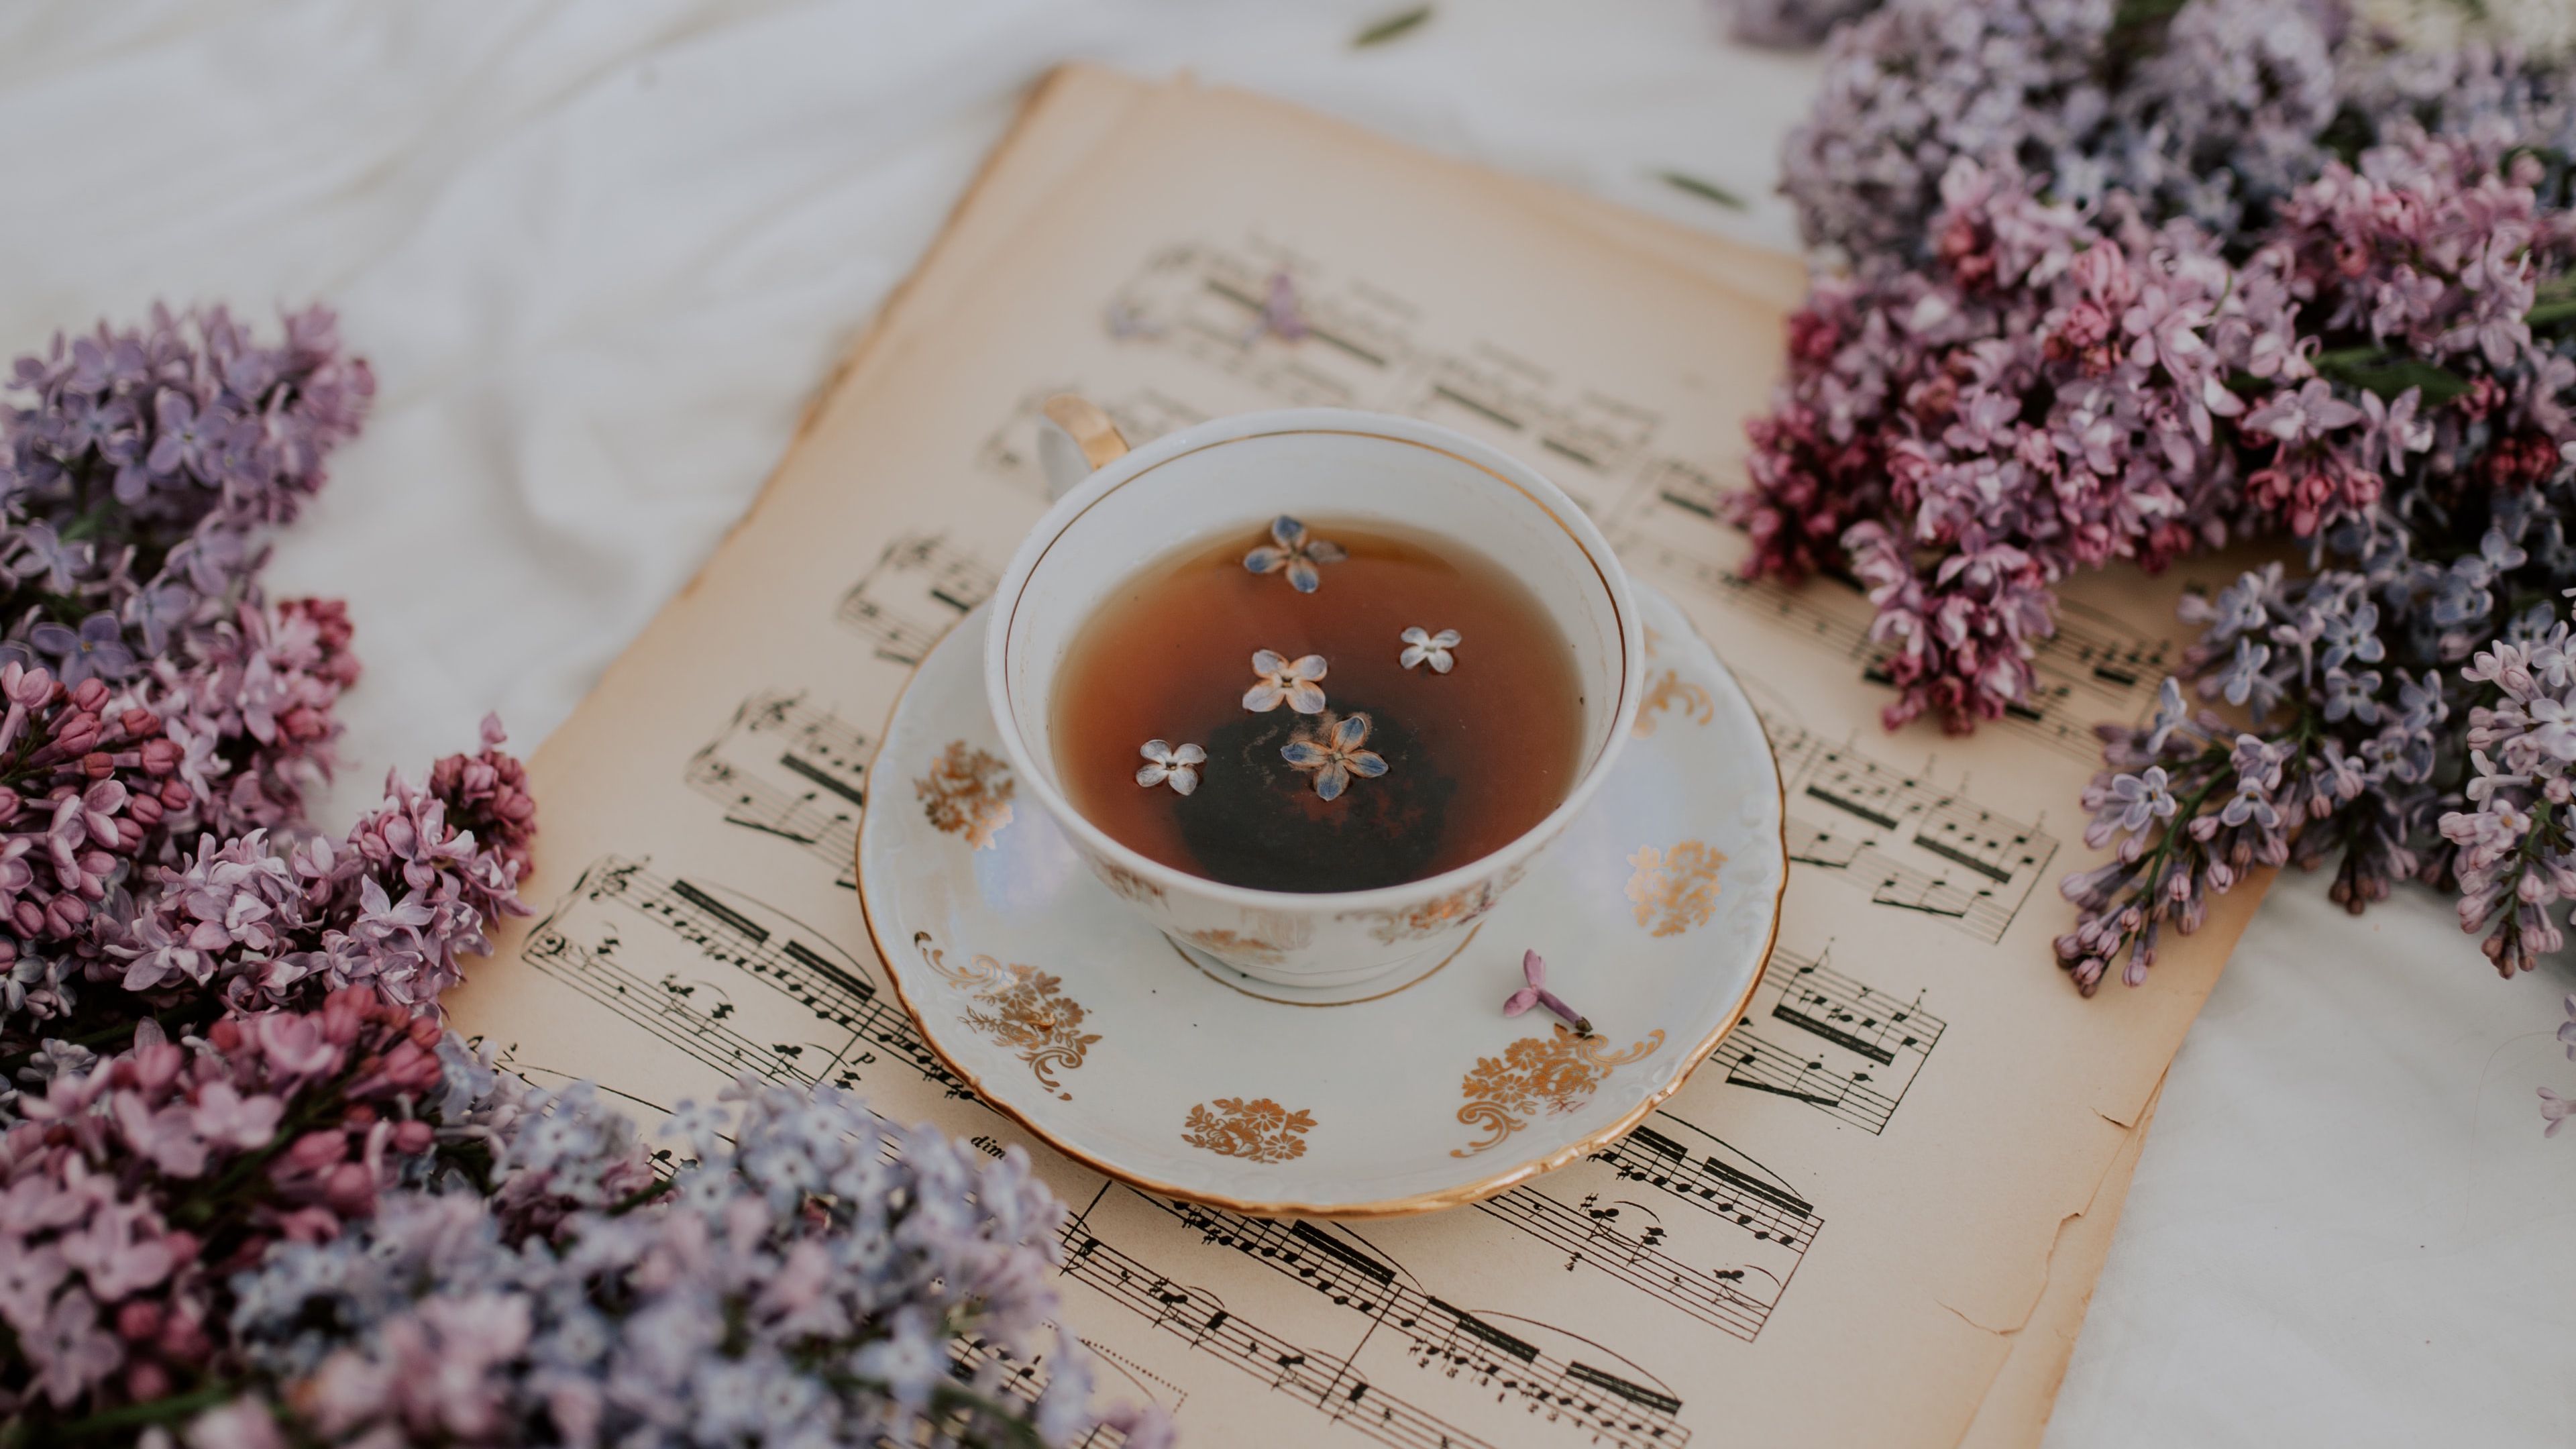 Download wallpaper 3840x2160 cup, tea, lilac, flowers, notes, still life 4k uhd 16:9 HD background